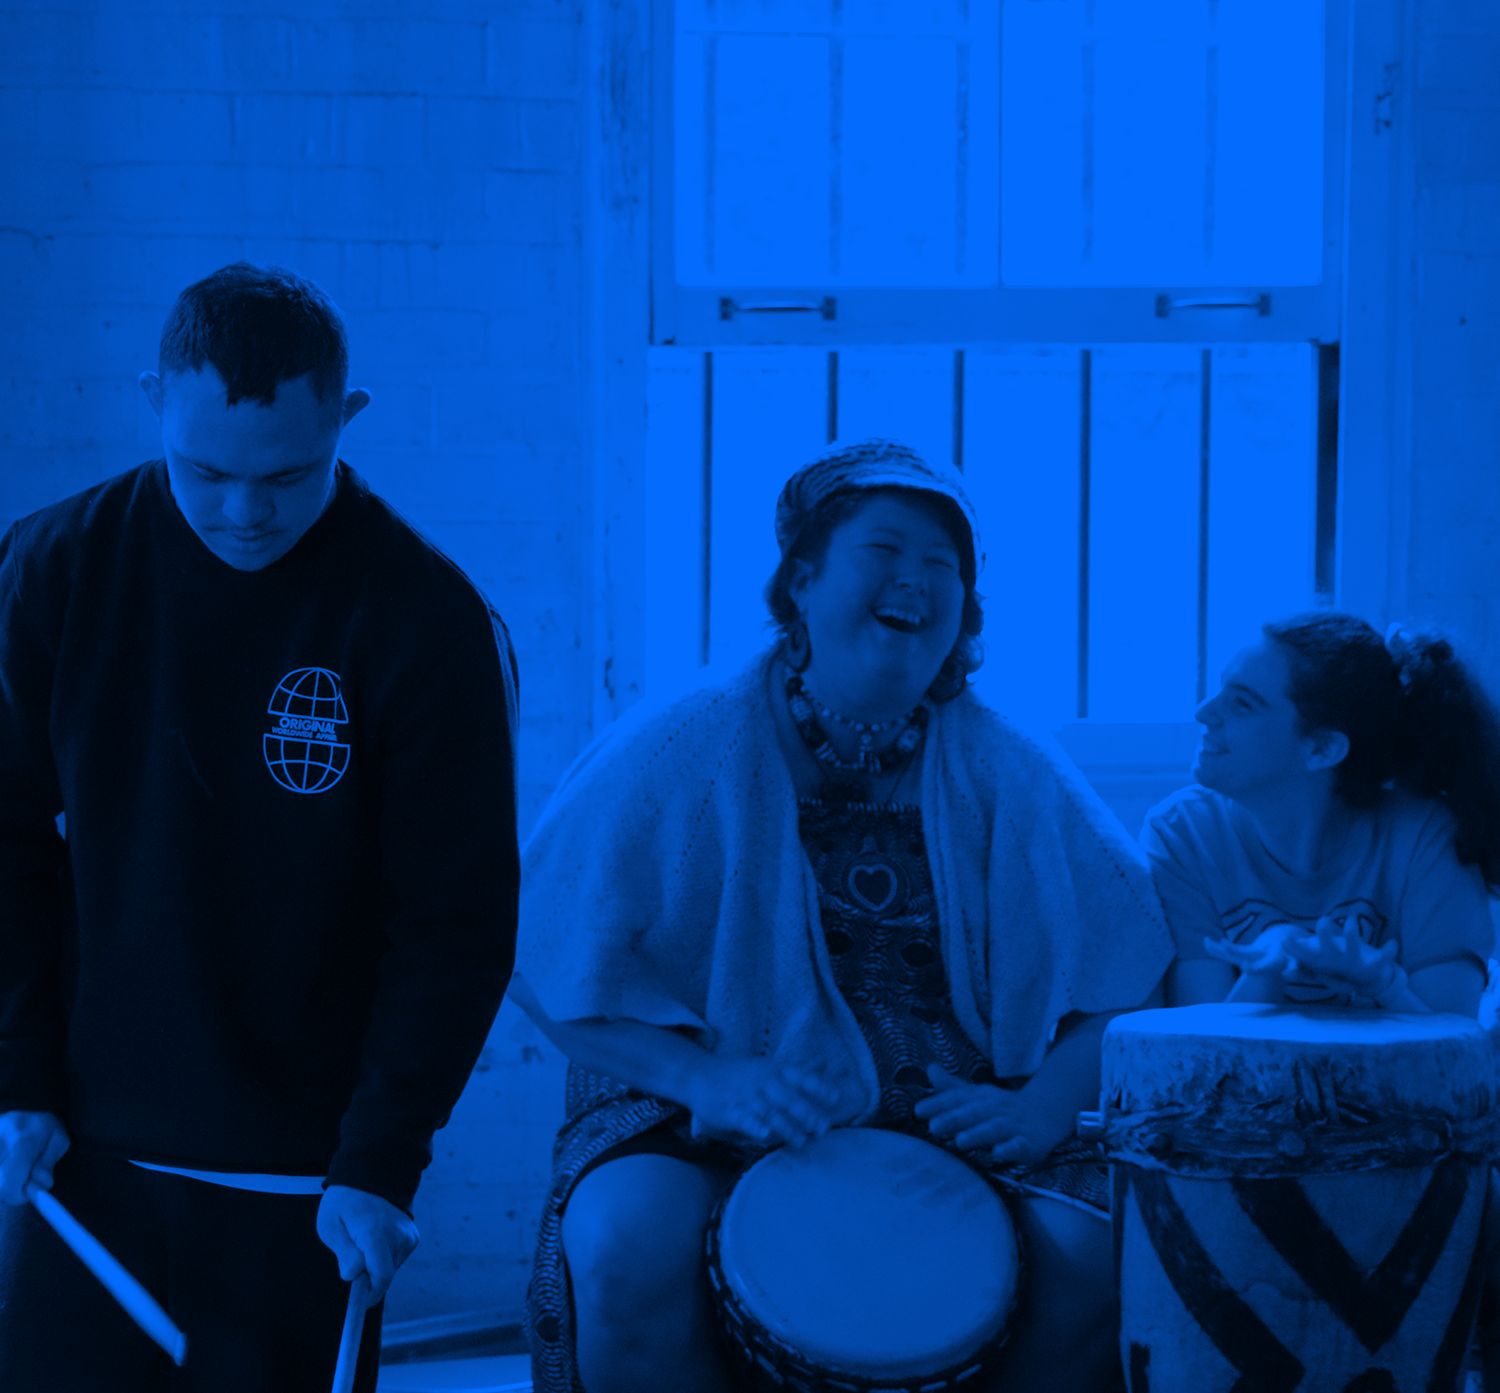 Blue washed image of three people drumming